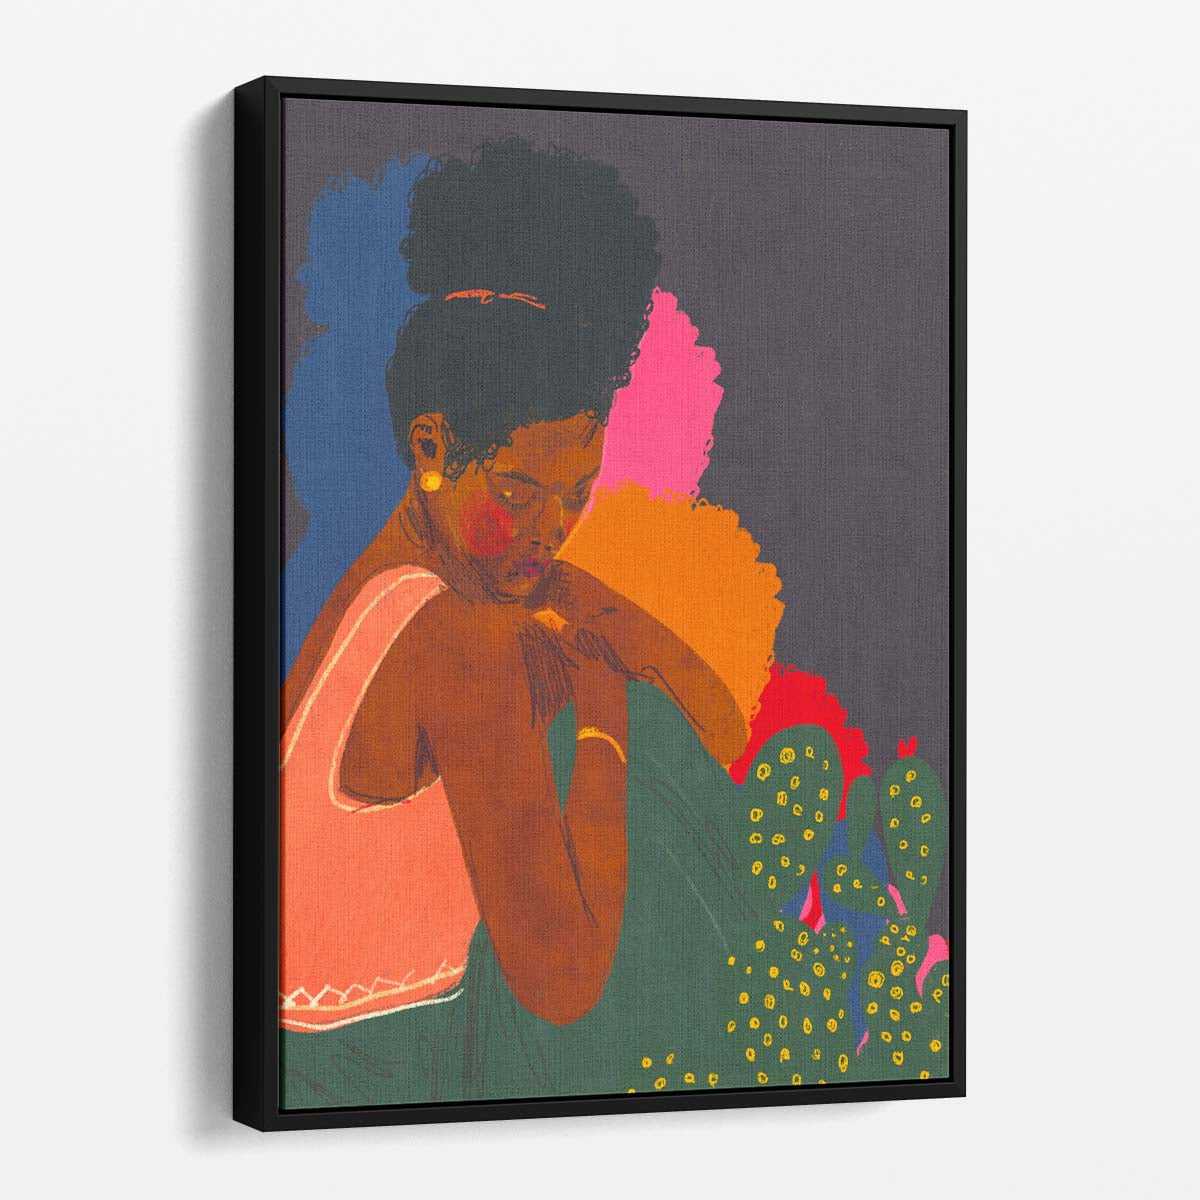 Colorful Figurative Illustration of Resting Black Woman by Gigi Rosado by Luxuriance Designs, made in USA